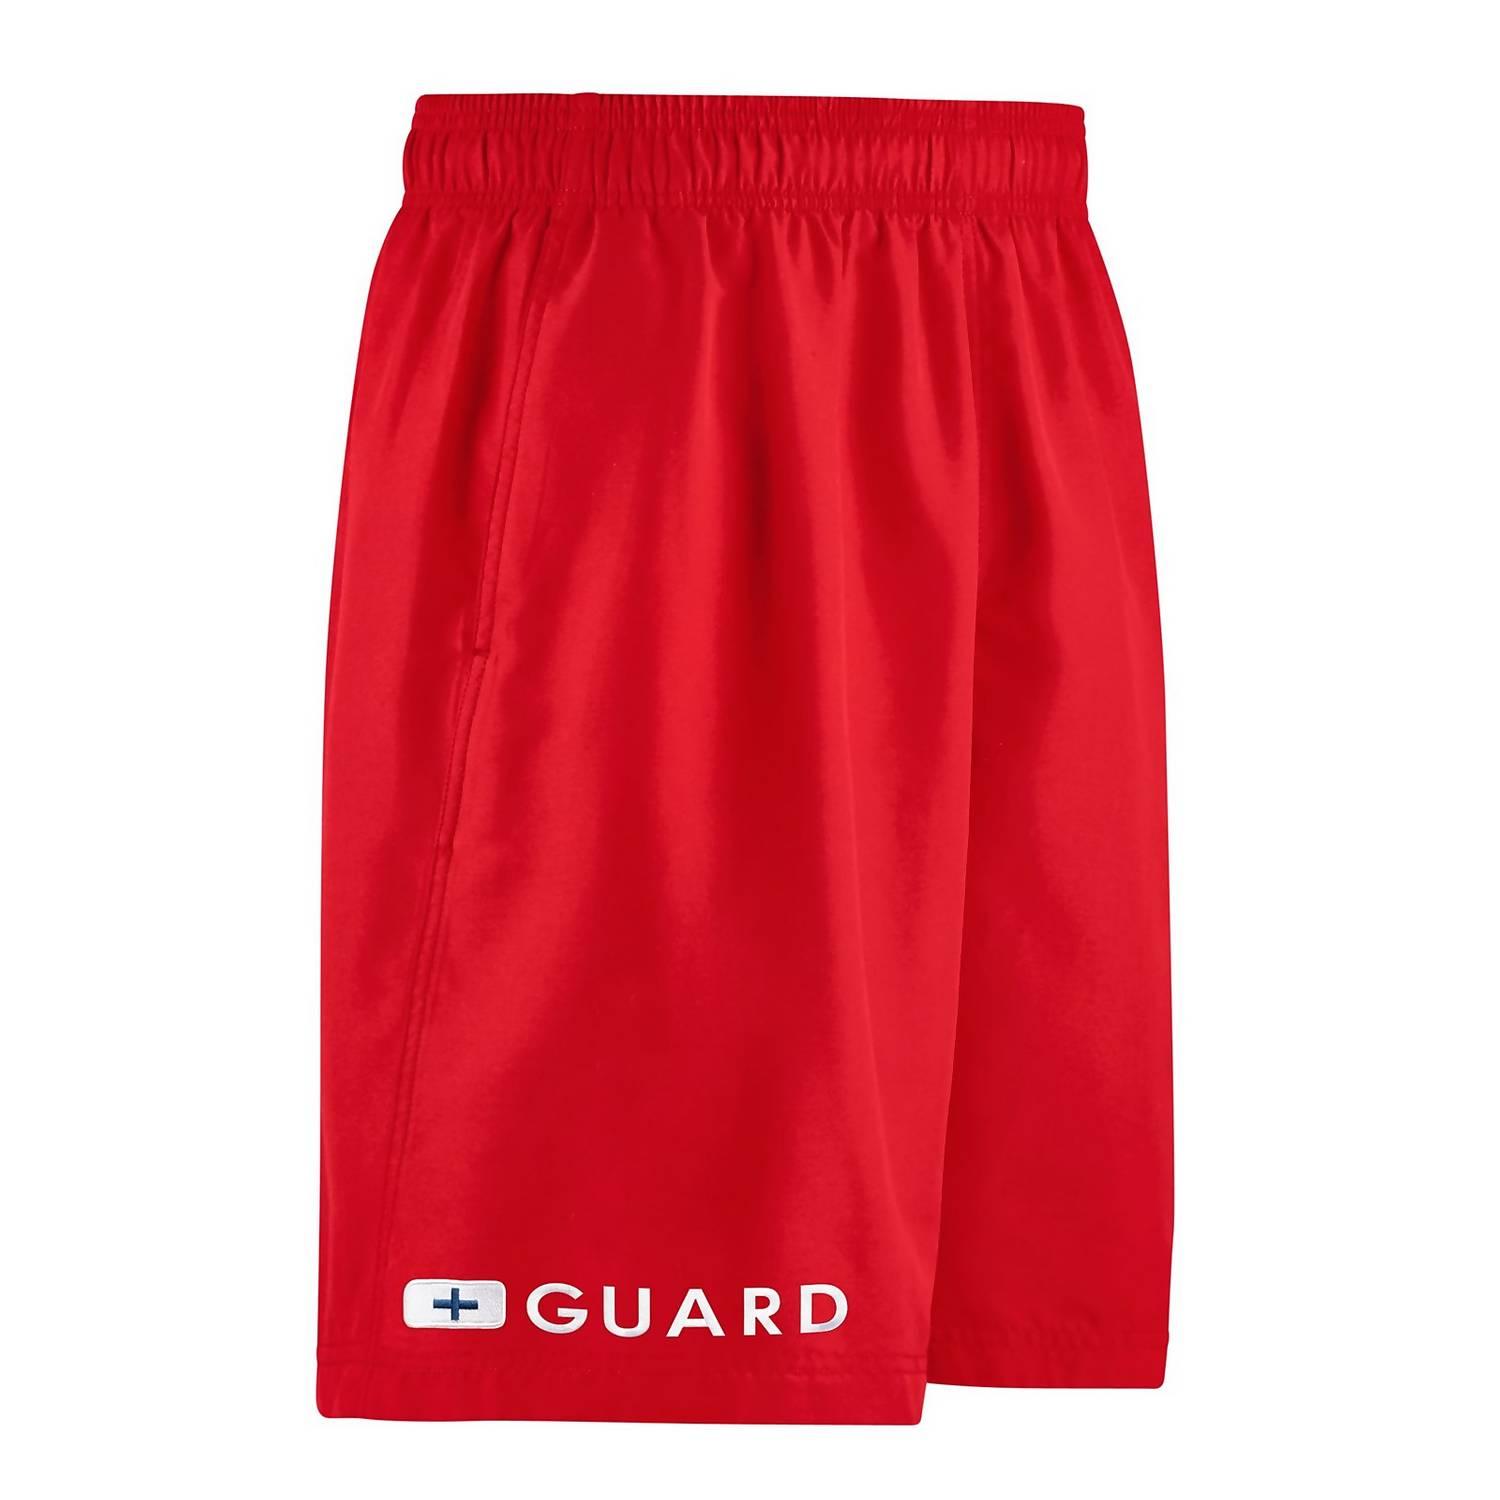 Speedo Guard Swim Wear Collection For Active Lifeguards